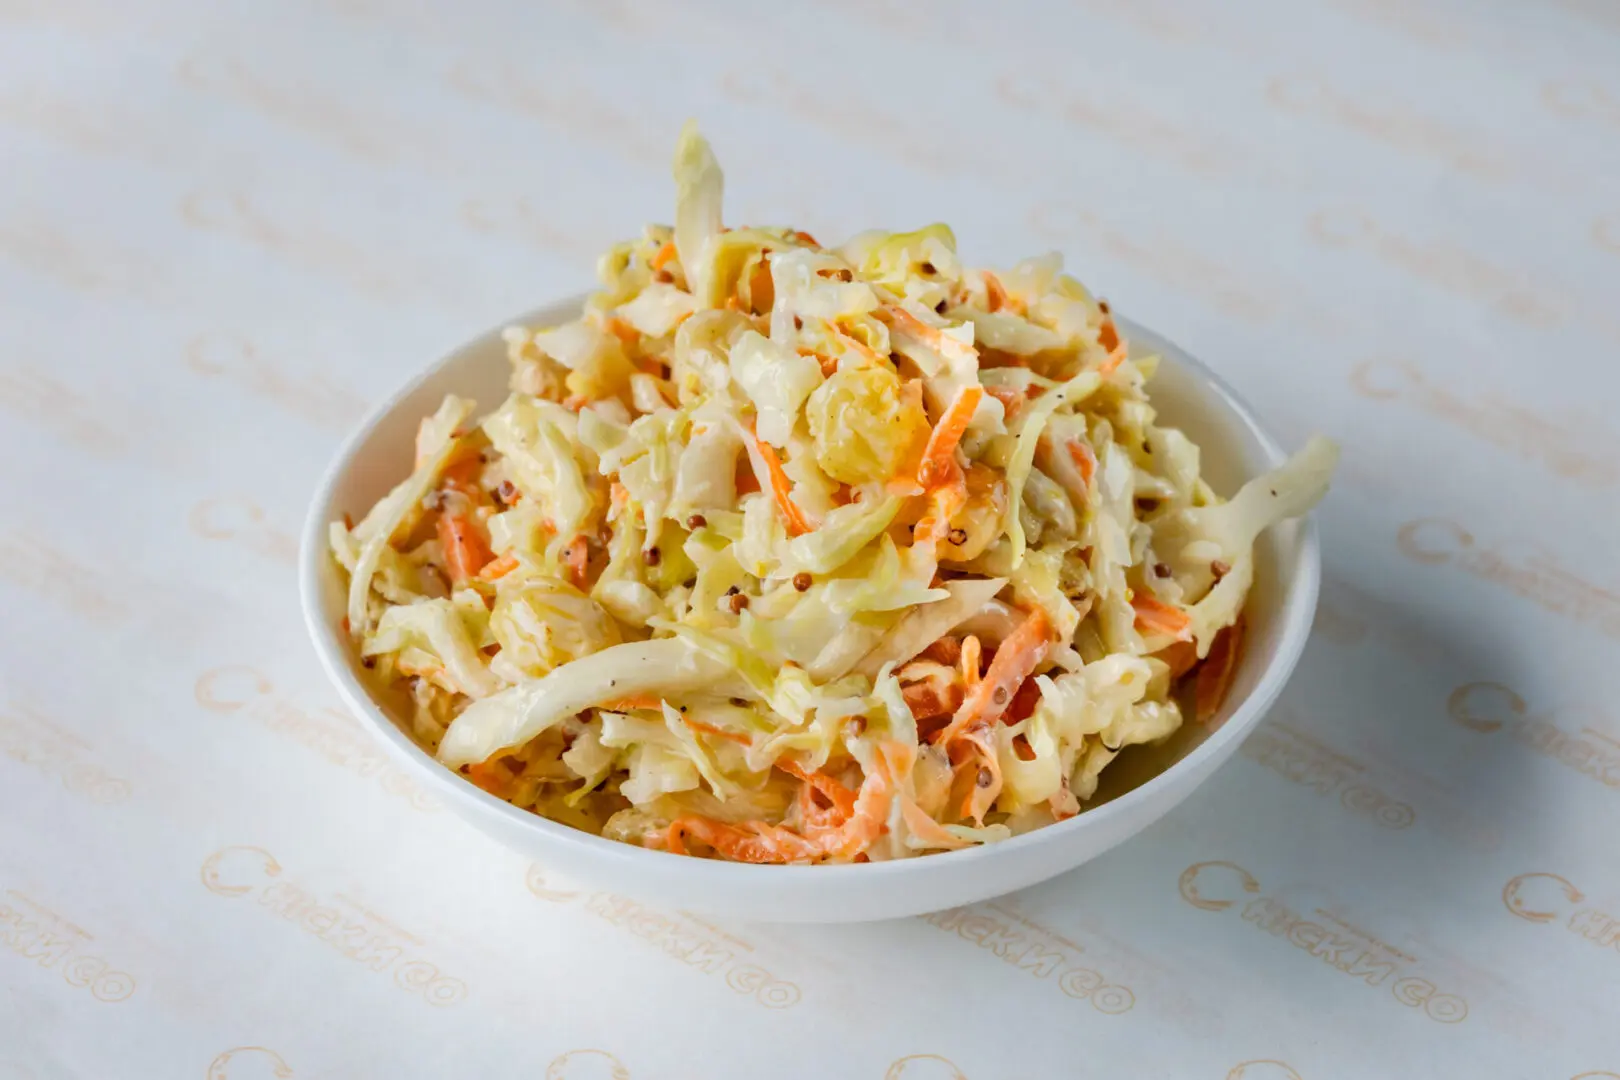 A bowl of coleslaw on the table